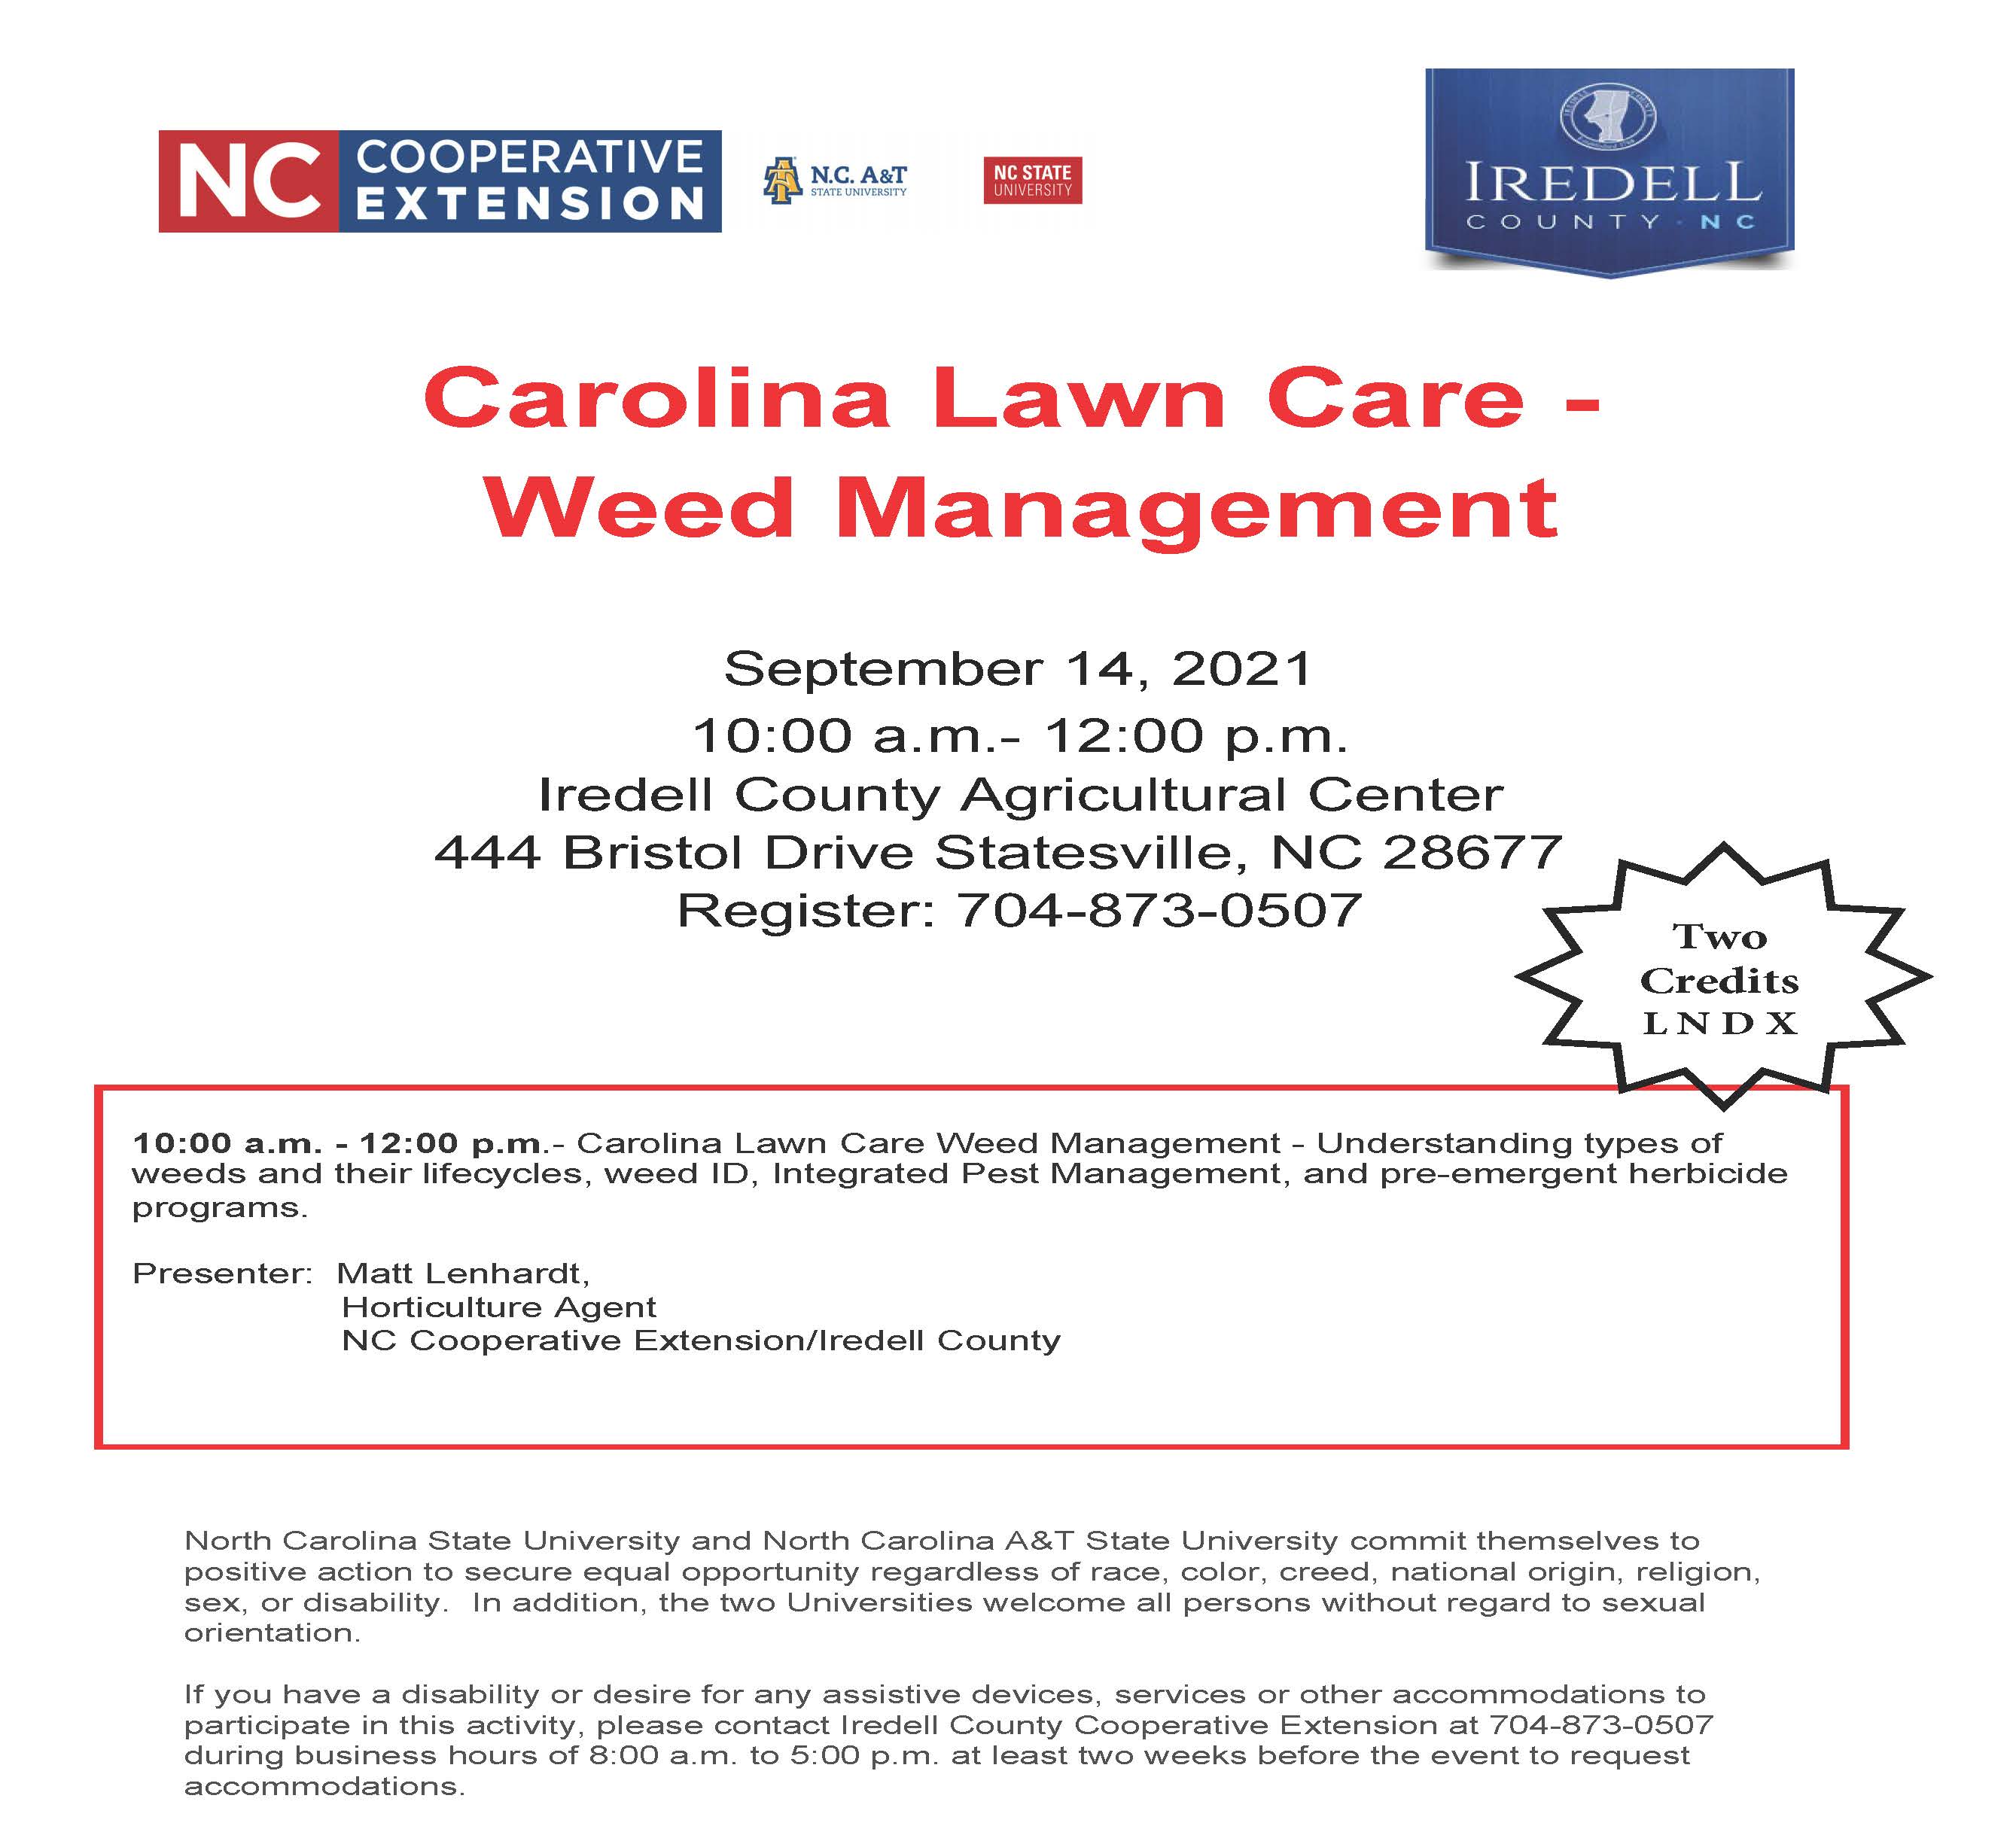 Carolina Lawn Care Class Sept 14, 2021 10 a.m. - 12 p.m. at Iredell County Agricultural Center 444 Bristol Drive Statesville 704-873-0507 